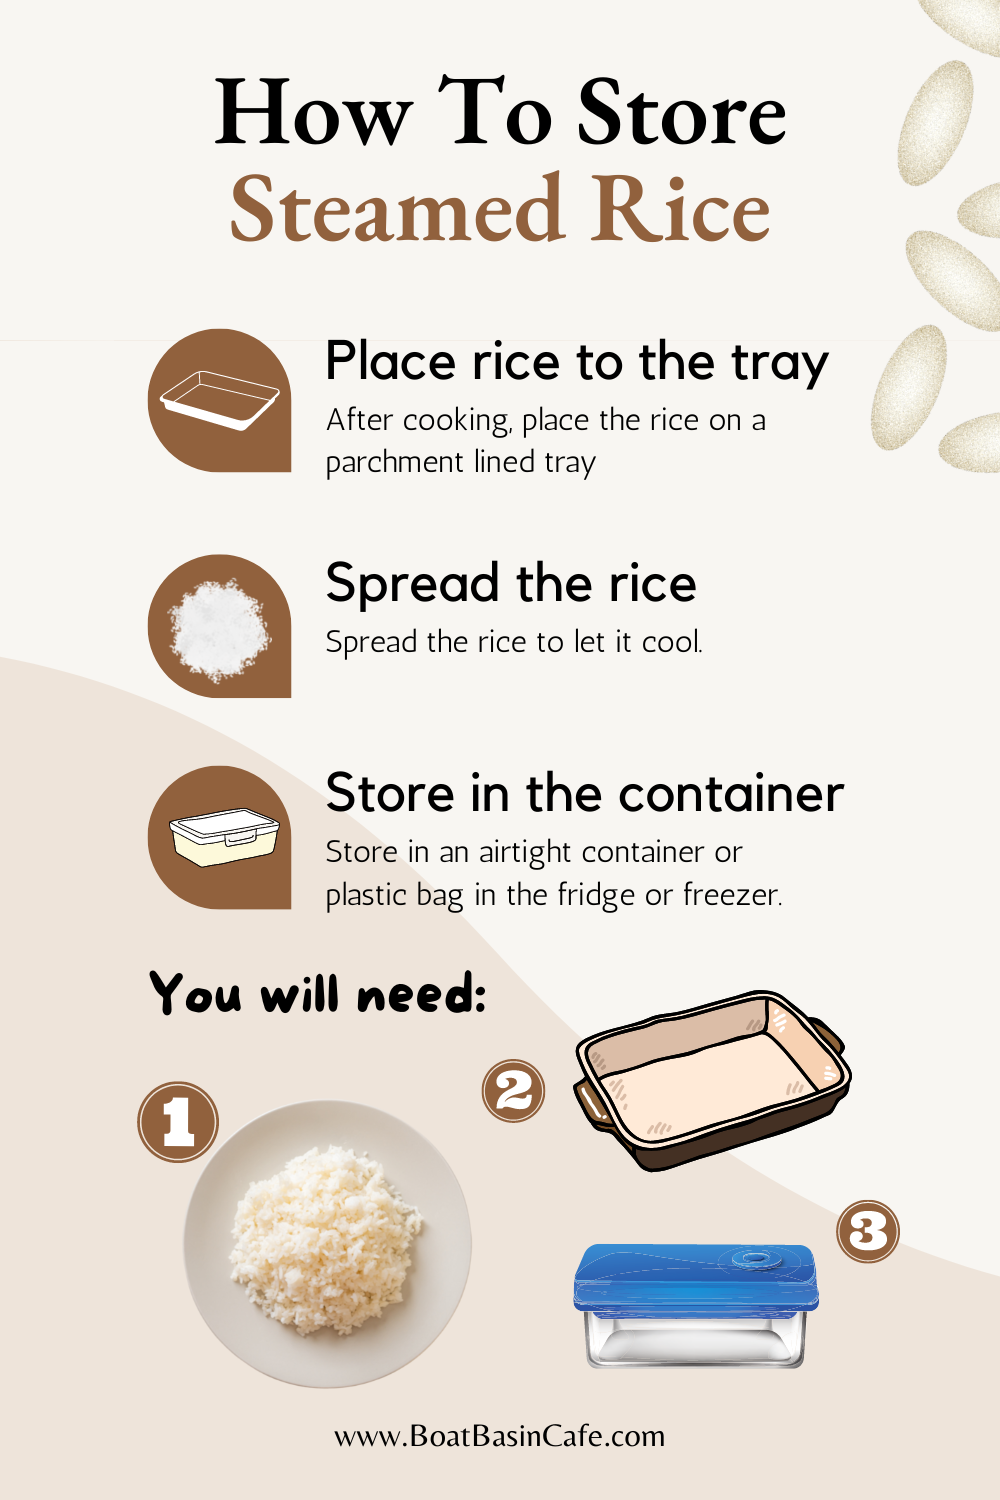 How To Store Steamed Rice